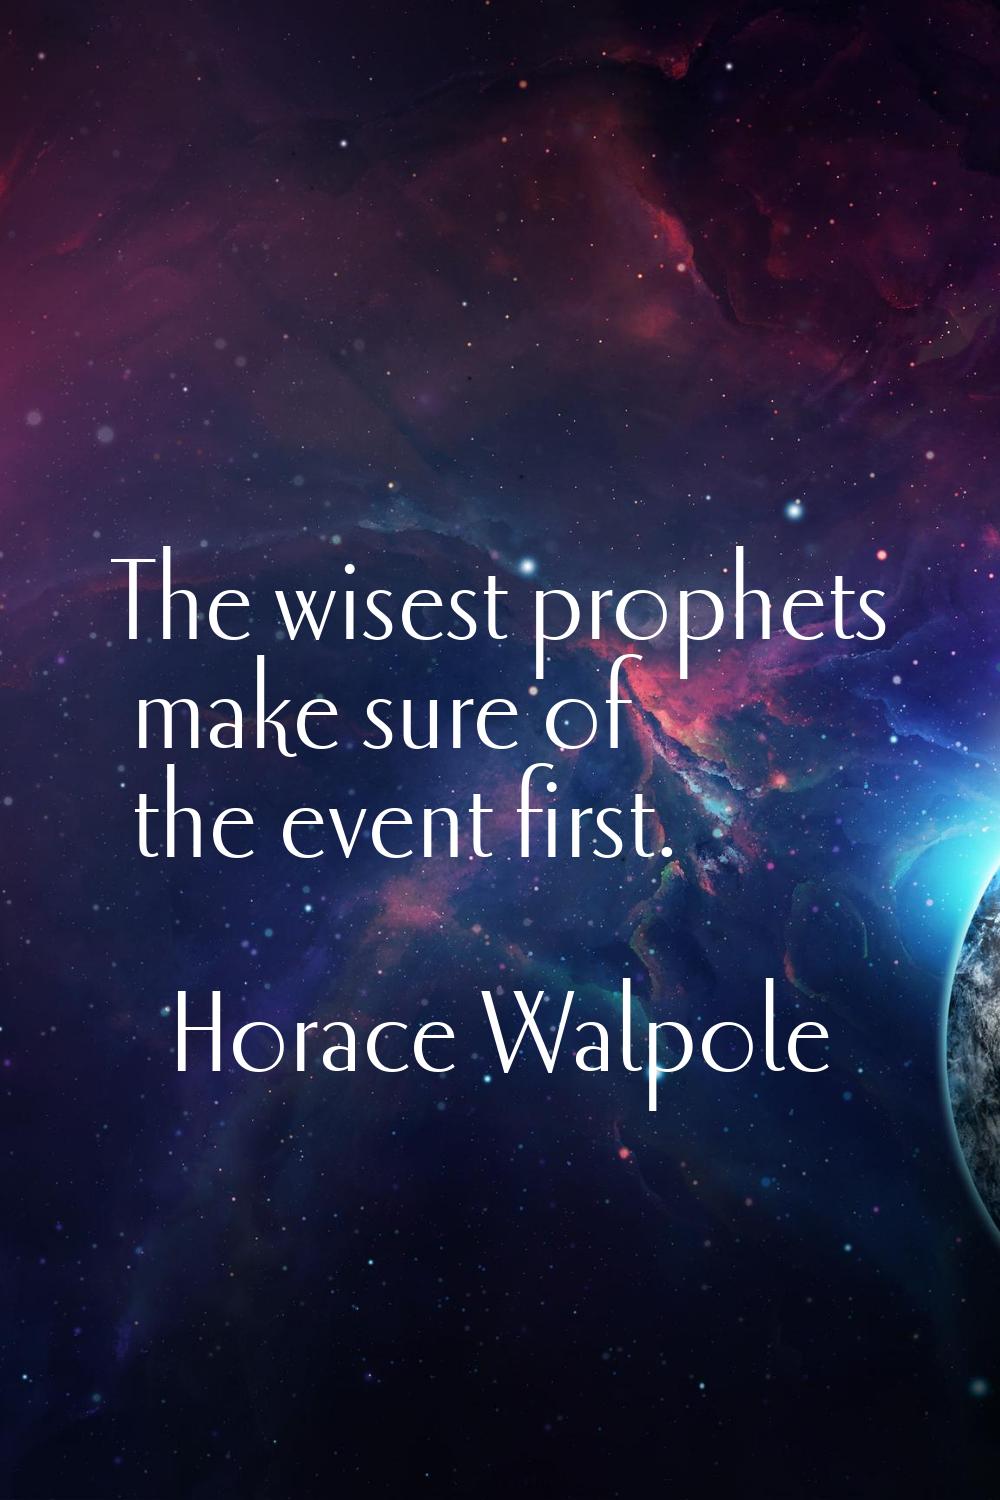 The wisest prophets make sure of the event first.